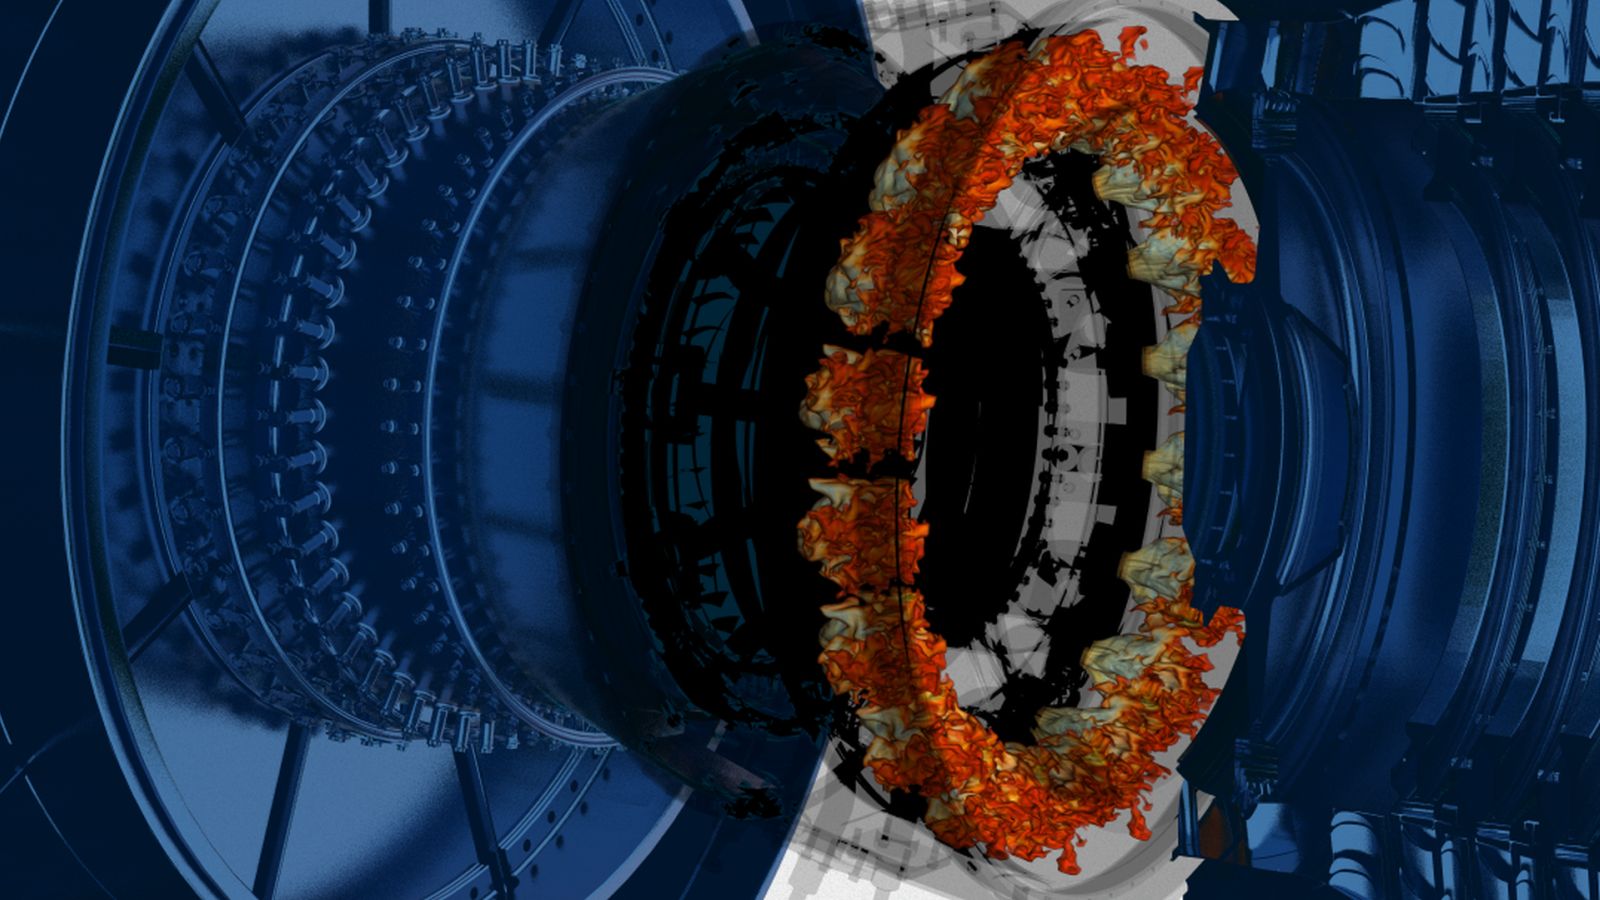 flame front in a hydrogen-powered gas turbine